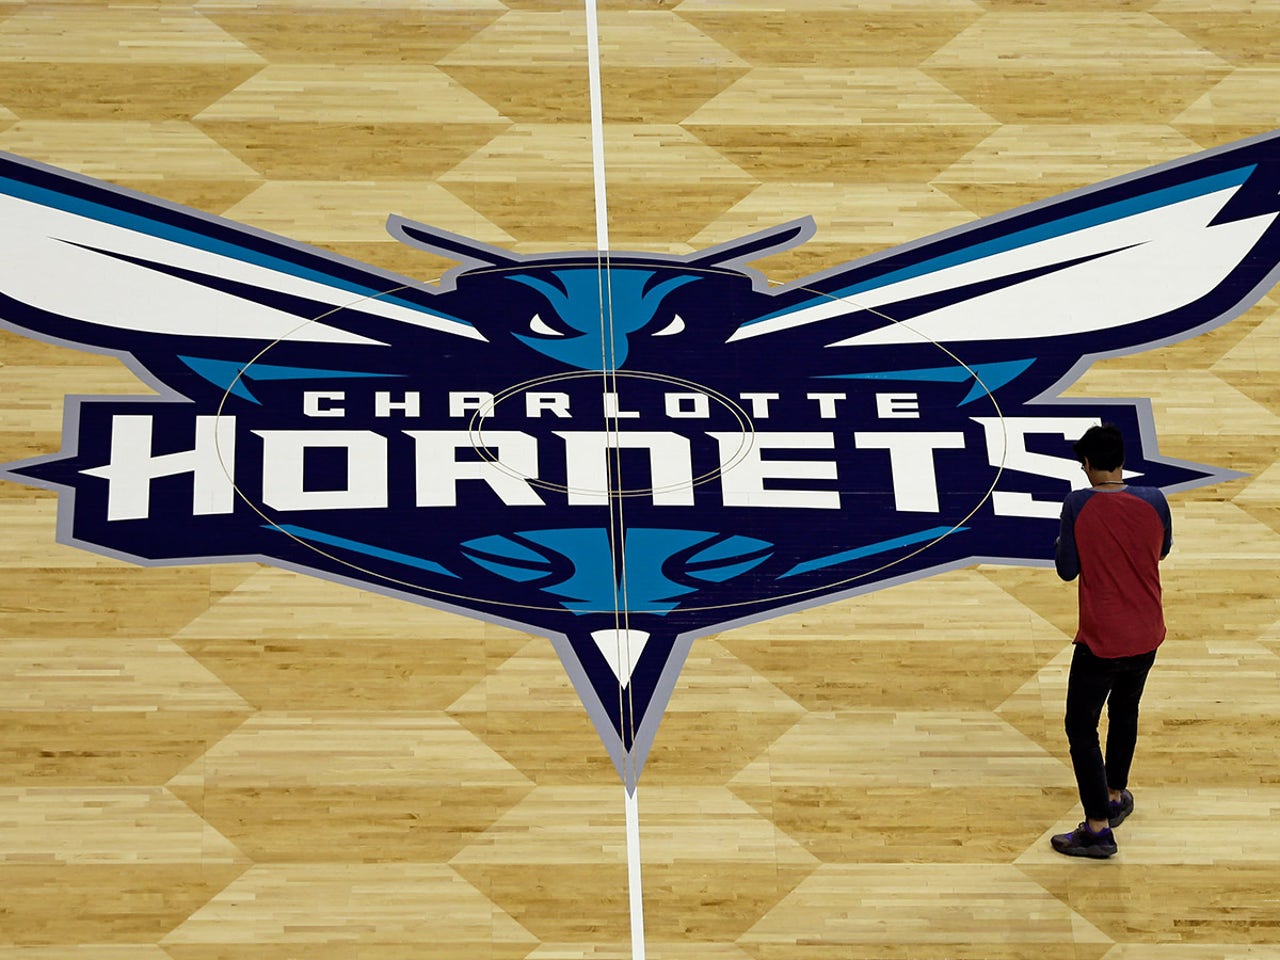 The Charlotte Hornets' new honeycomb court is perfection